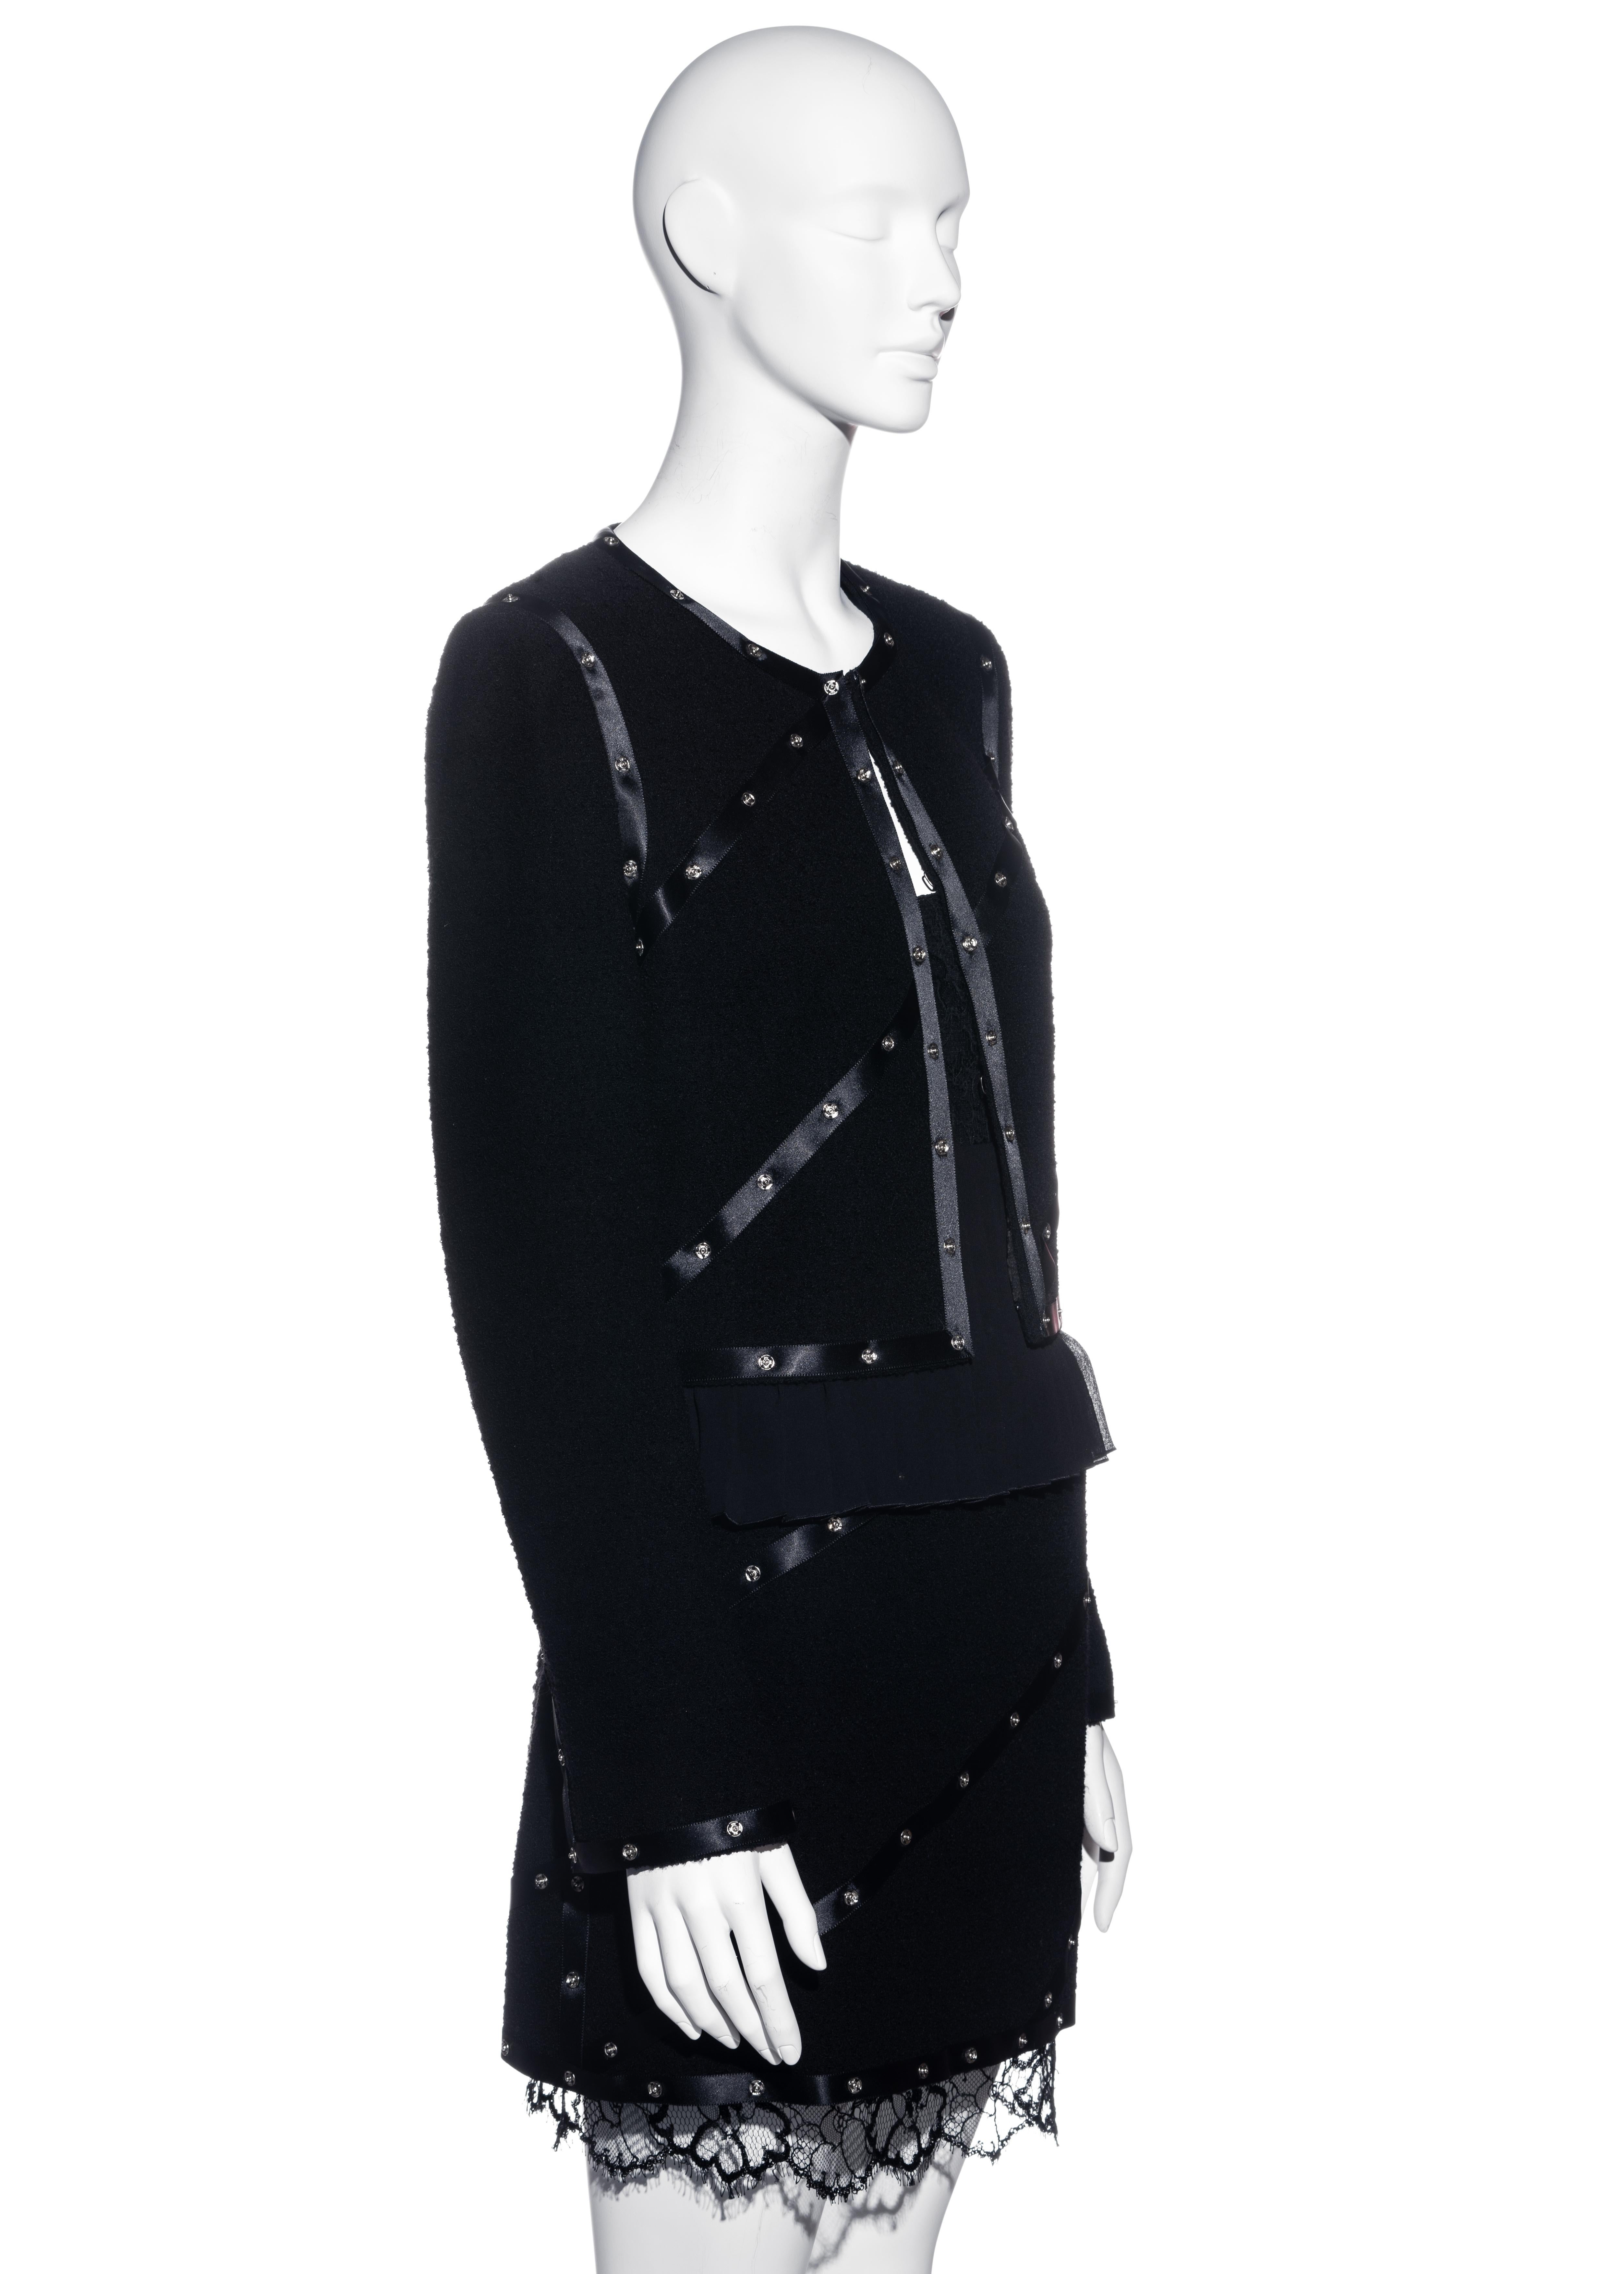 Chanel by Karl Lagerfeld black wool, silk and lace skirt suit, fw 2003 1